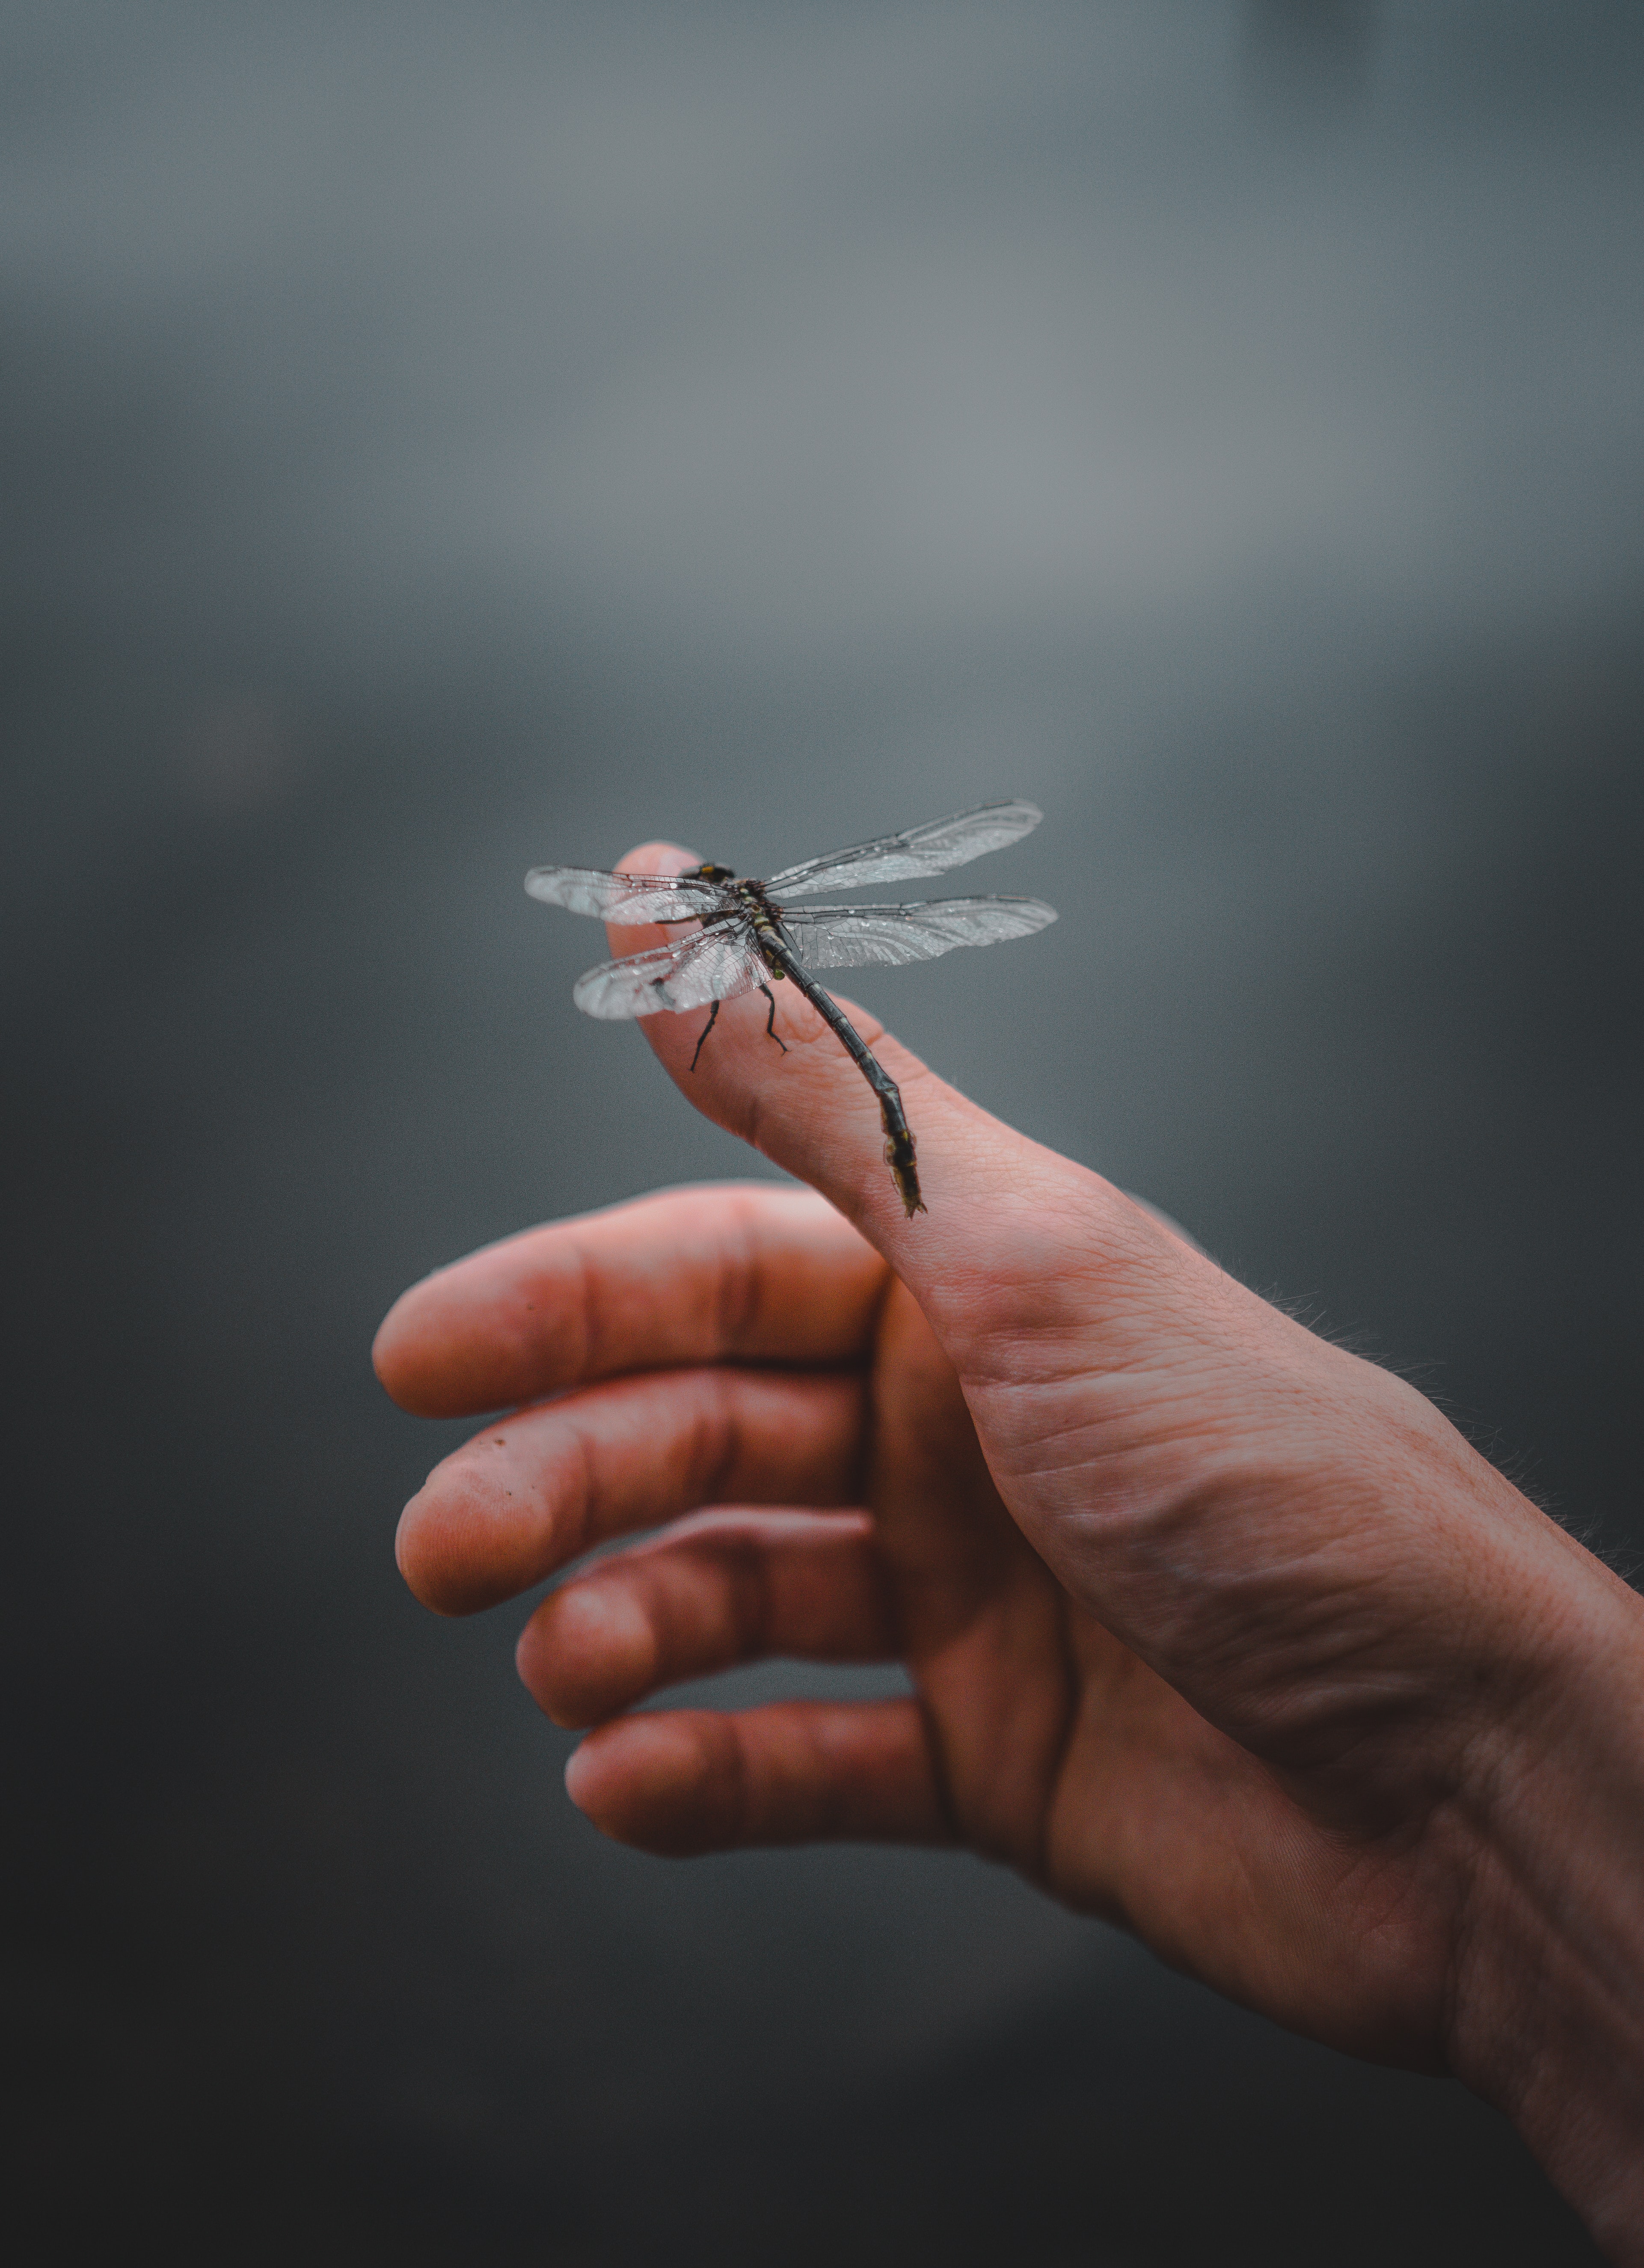 fingers, dragonfly, hand, miscellanea, miscellaneous, insect